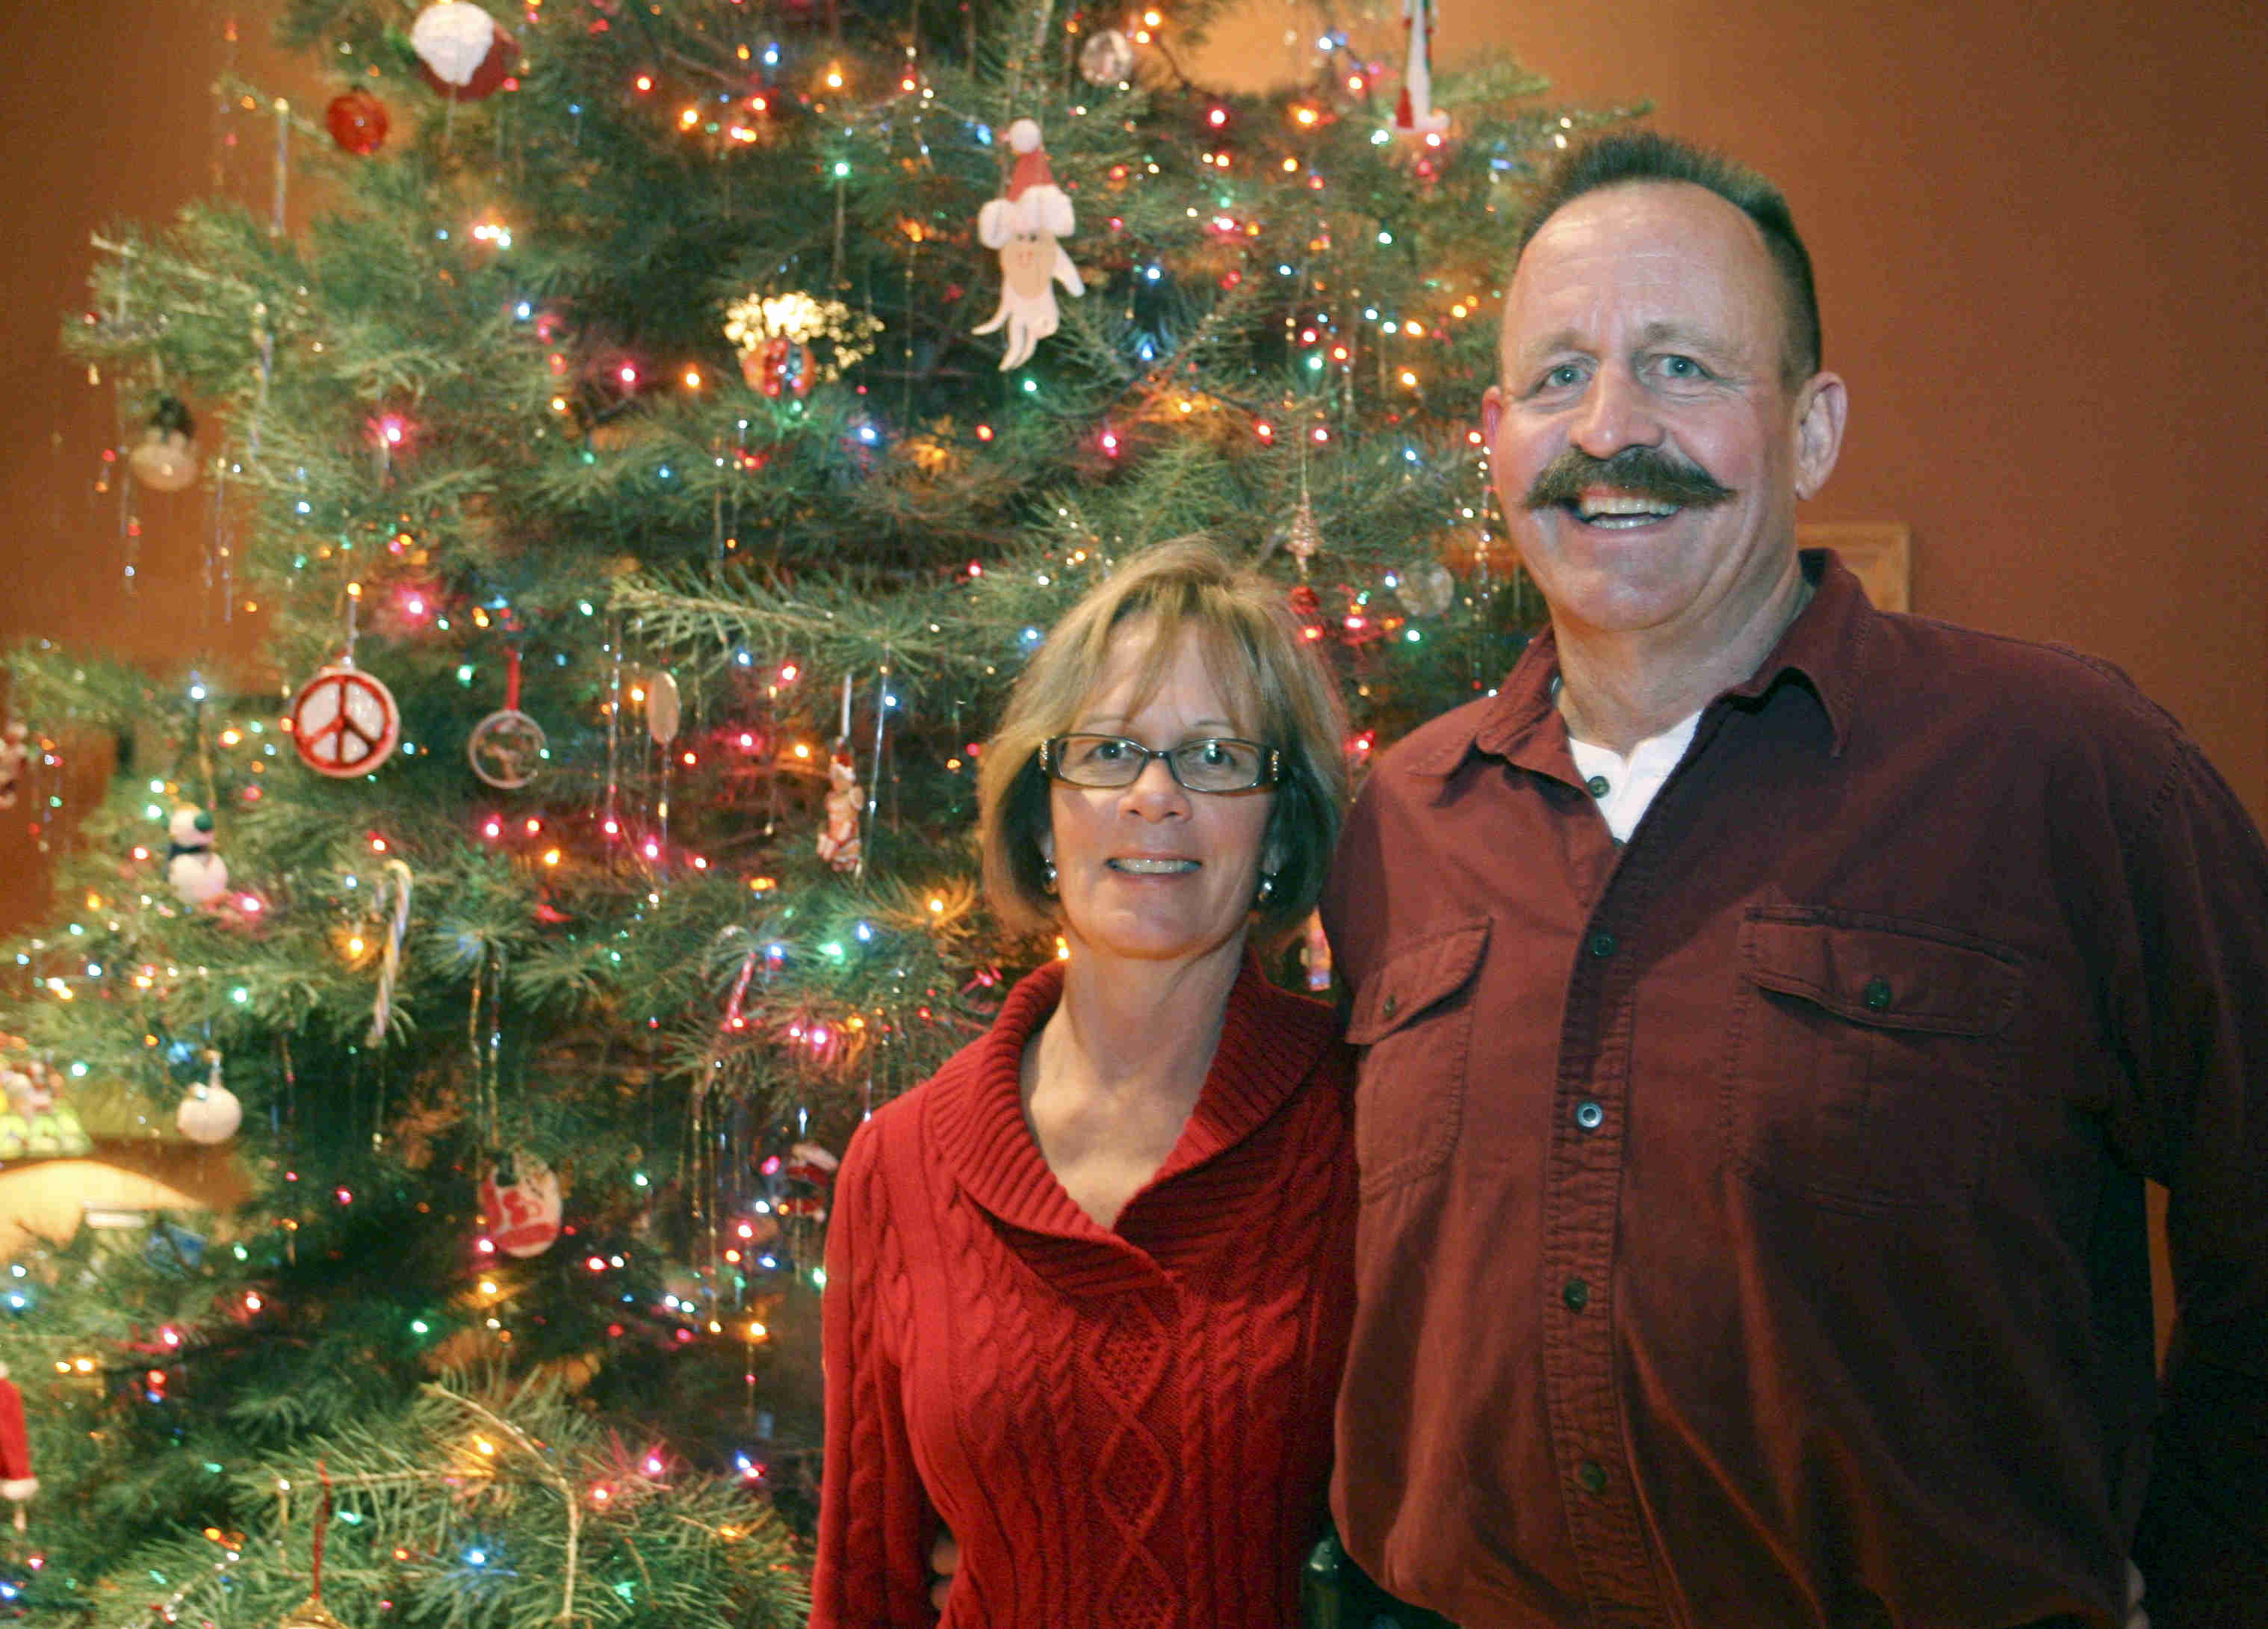 JESSICA M. KANALAS | THE VINDICATOR 
Paula and Frank Dietz show off their 18-foot Christmas tree. The couple always buy a large tree, but this year’s is the tallest.